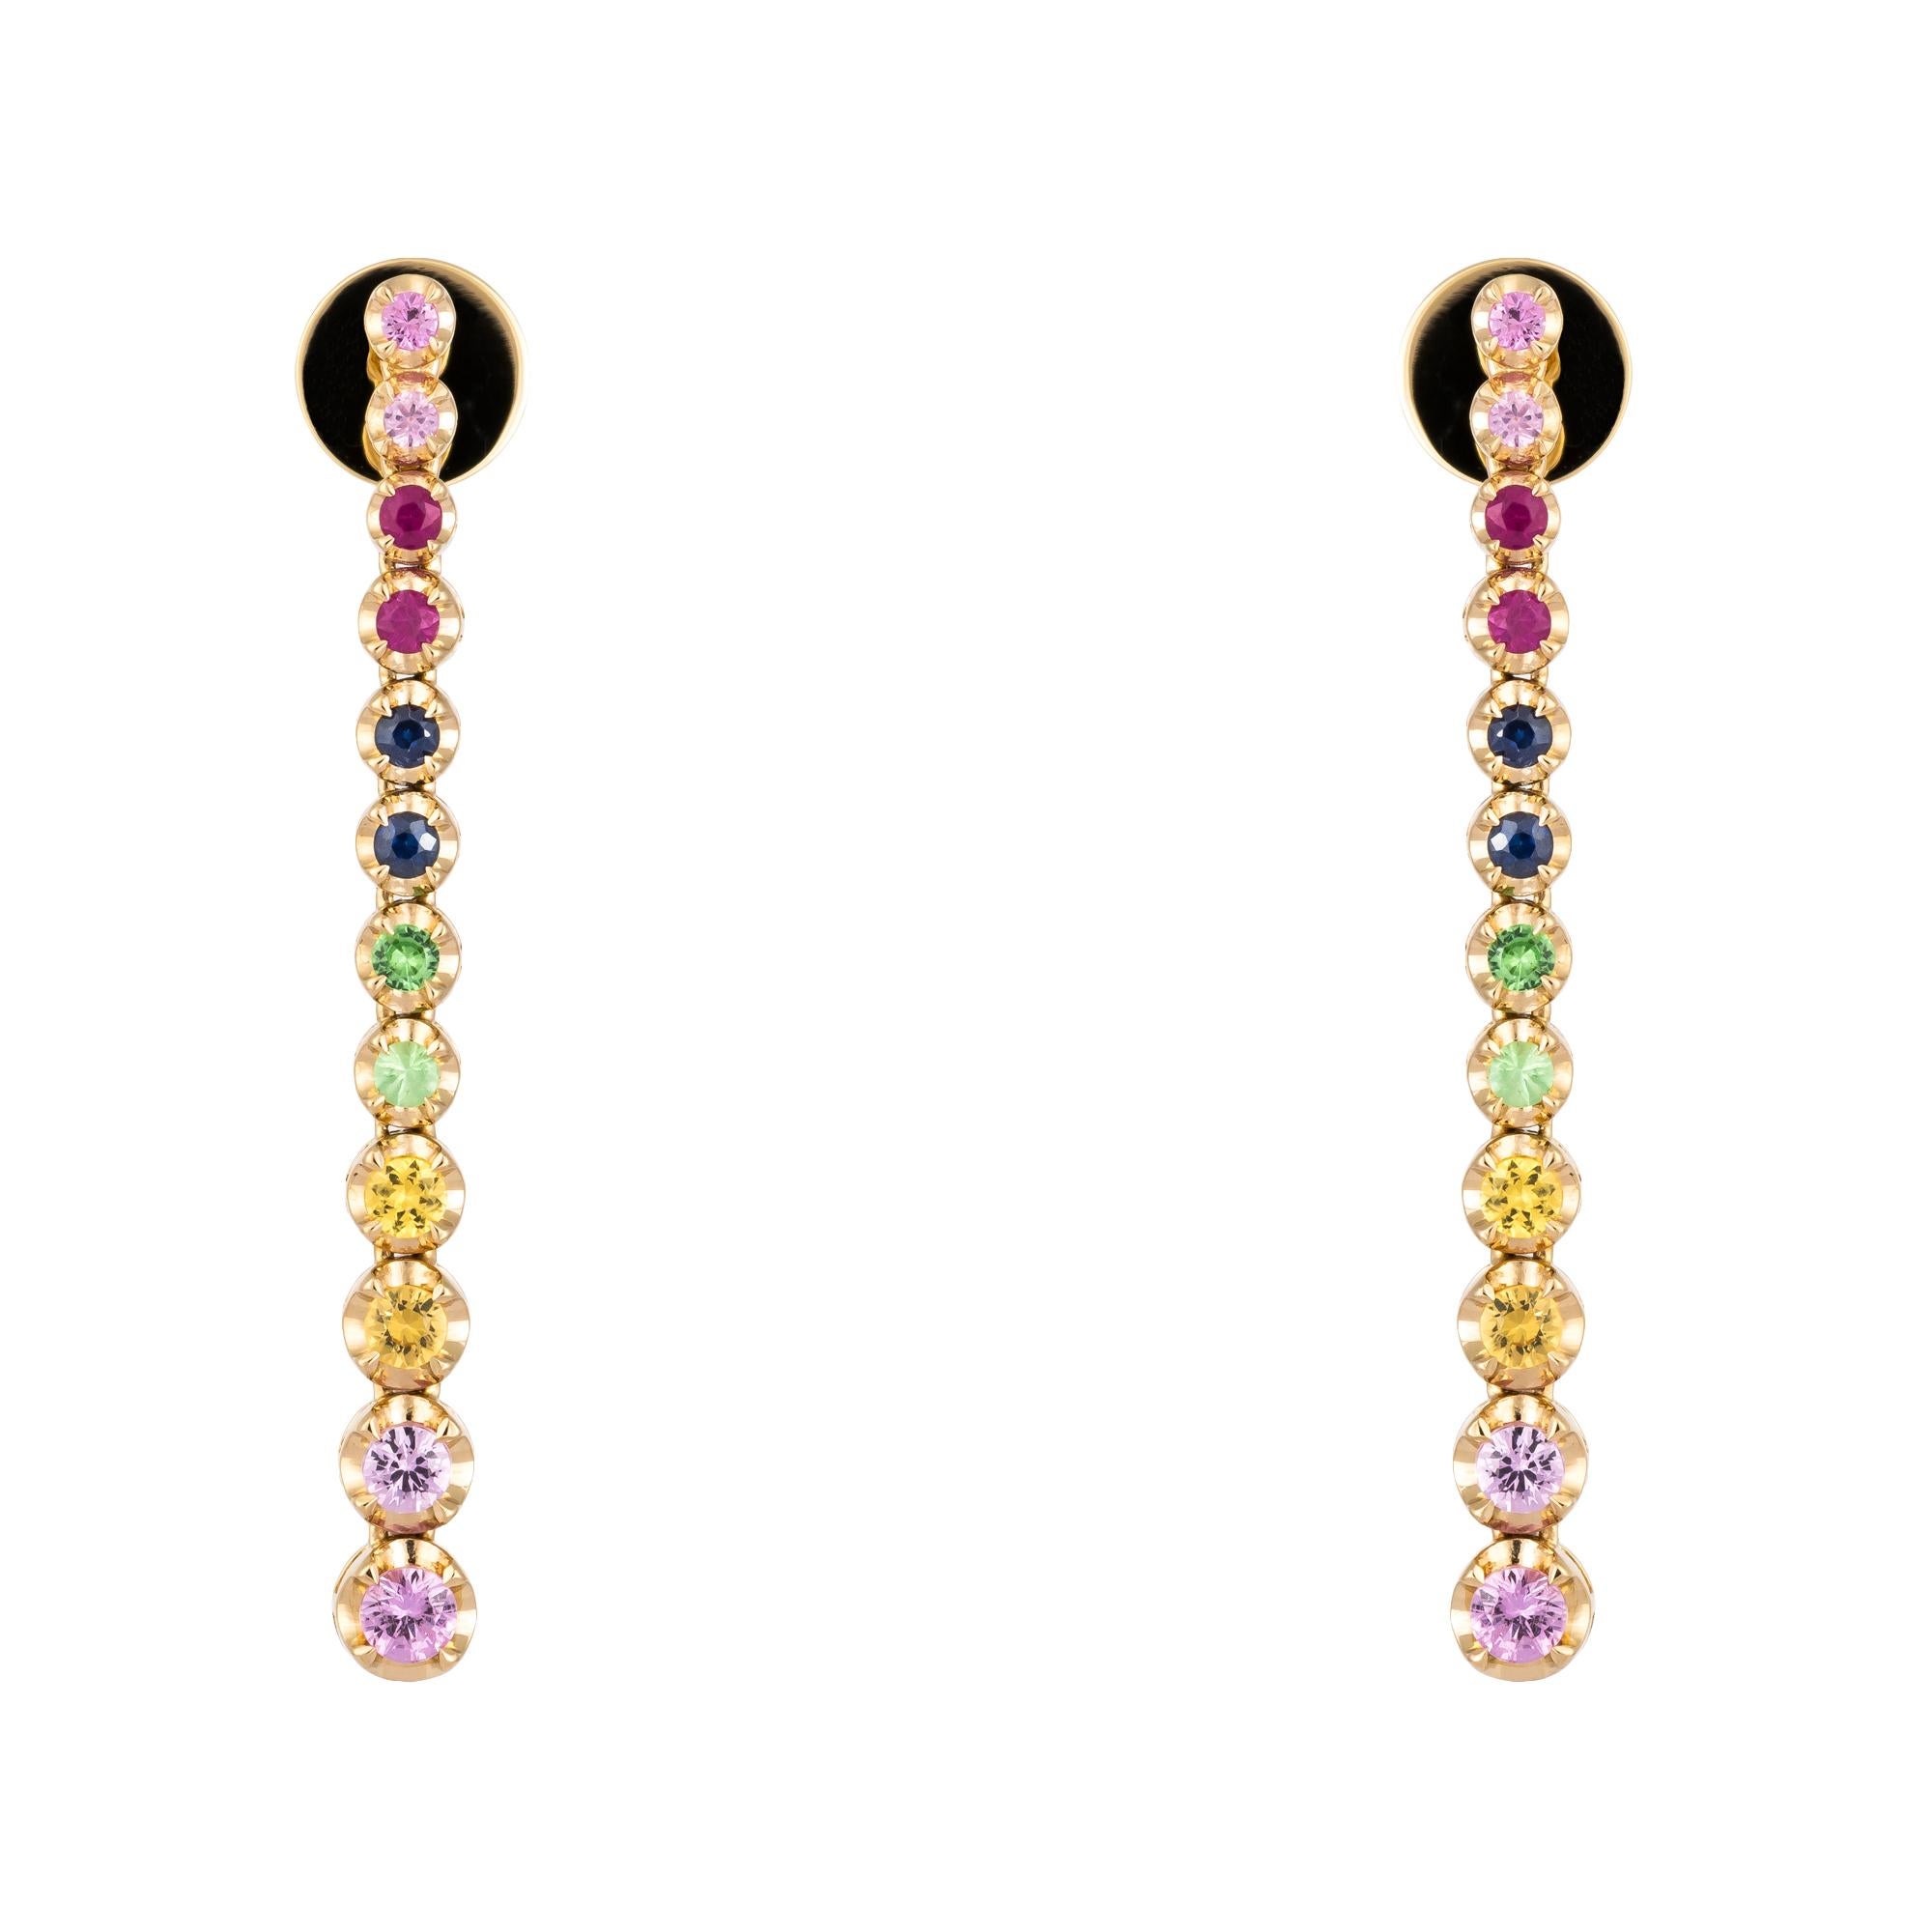 EARRING 18K Rose Gold Multi Sapphire 1.25 Cts/24 Pieces
